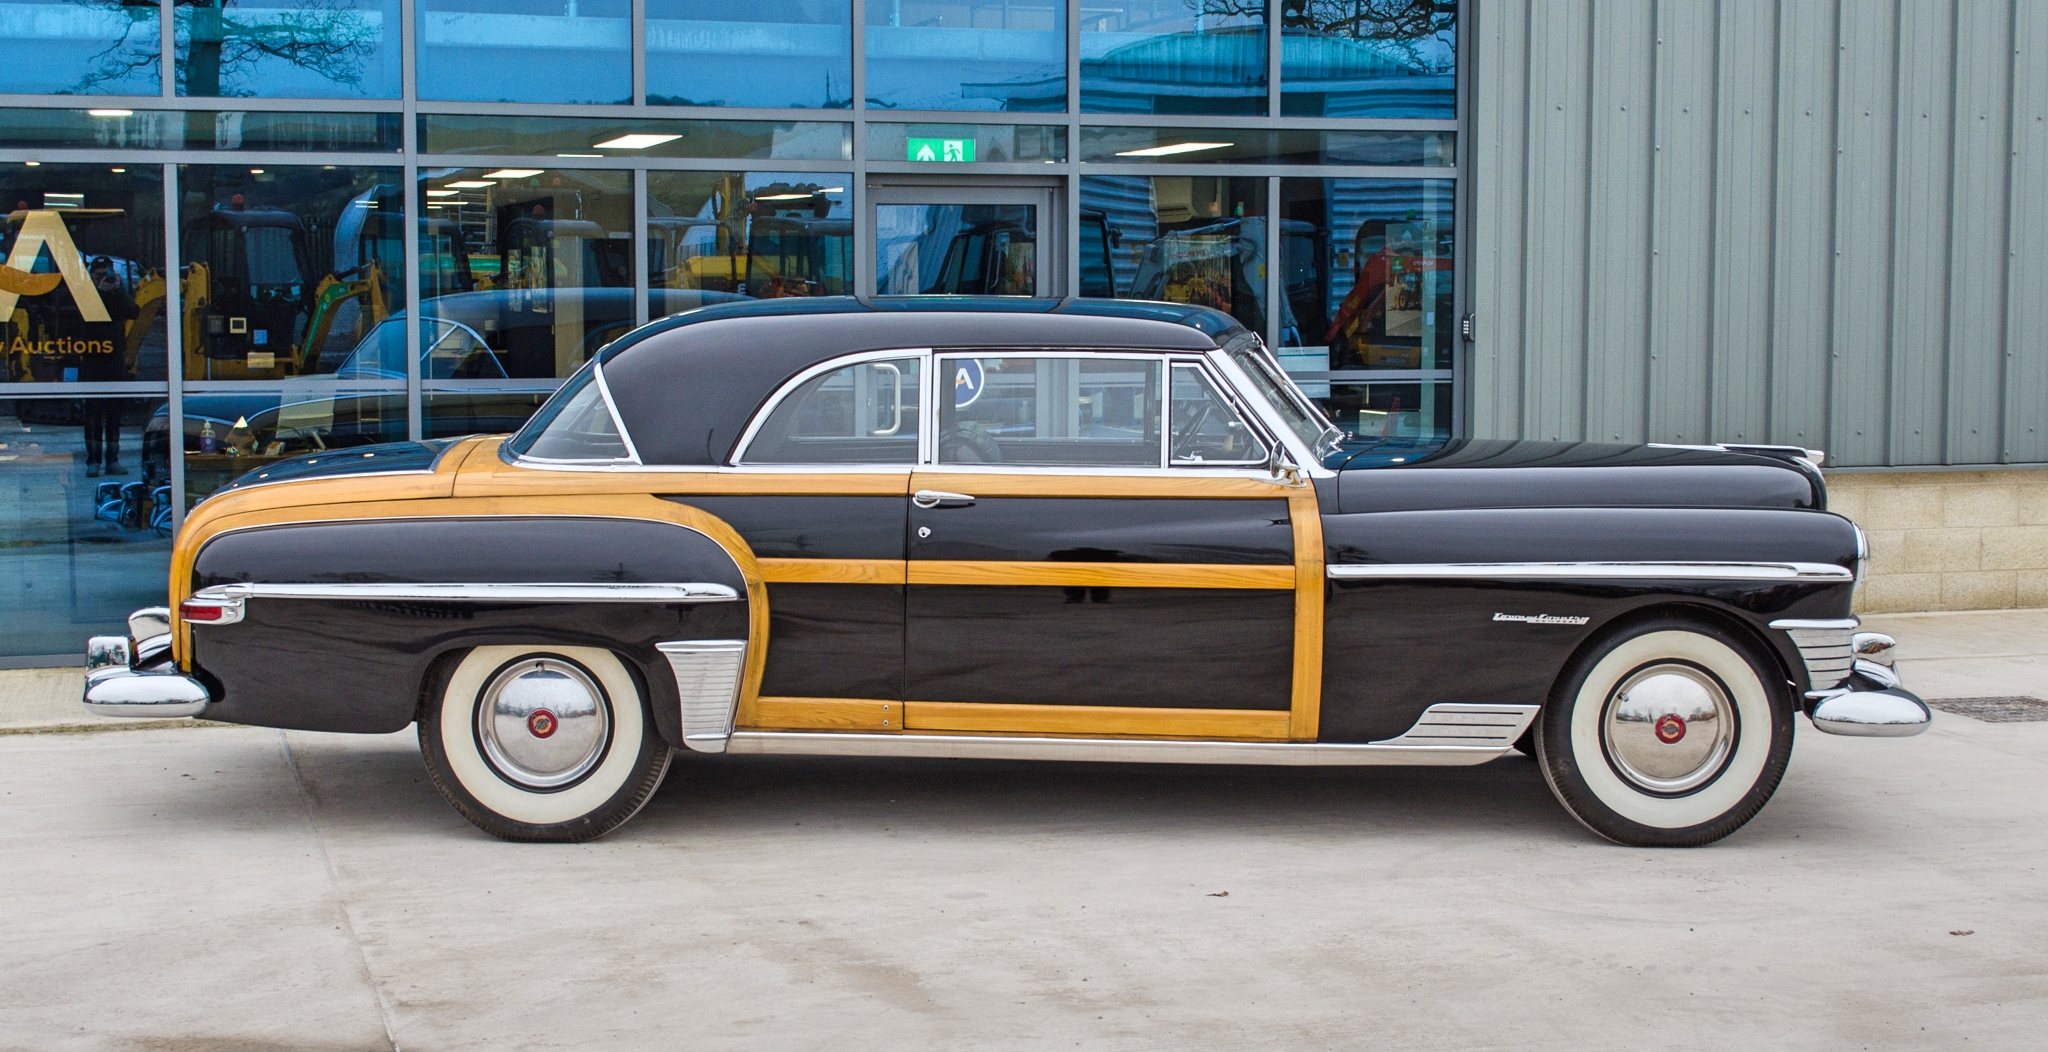 1950 Chrysler Newport Town and Country 5300cc 2 door Coupe - Image 14 of 62